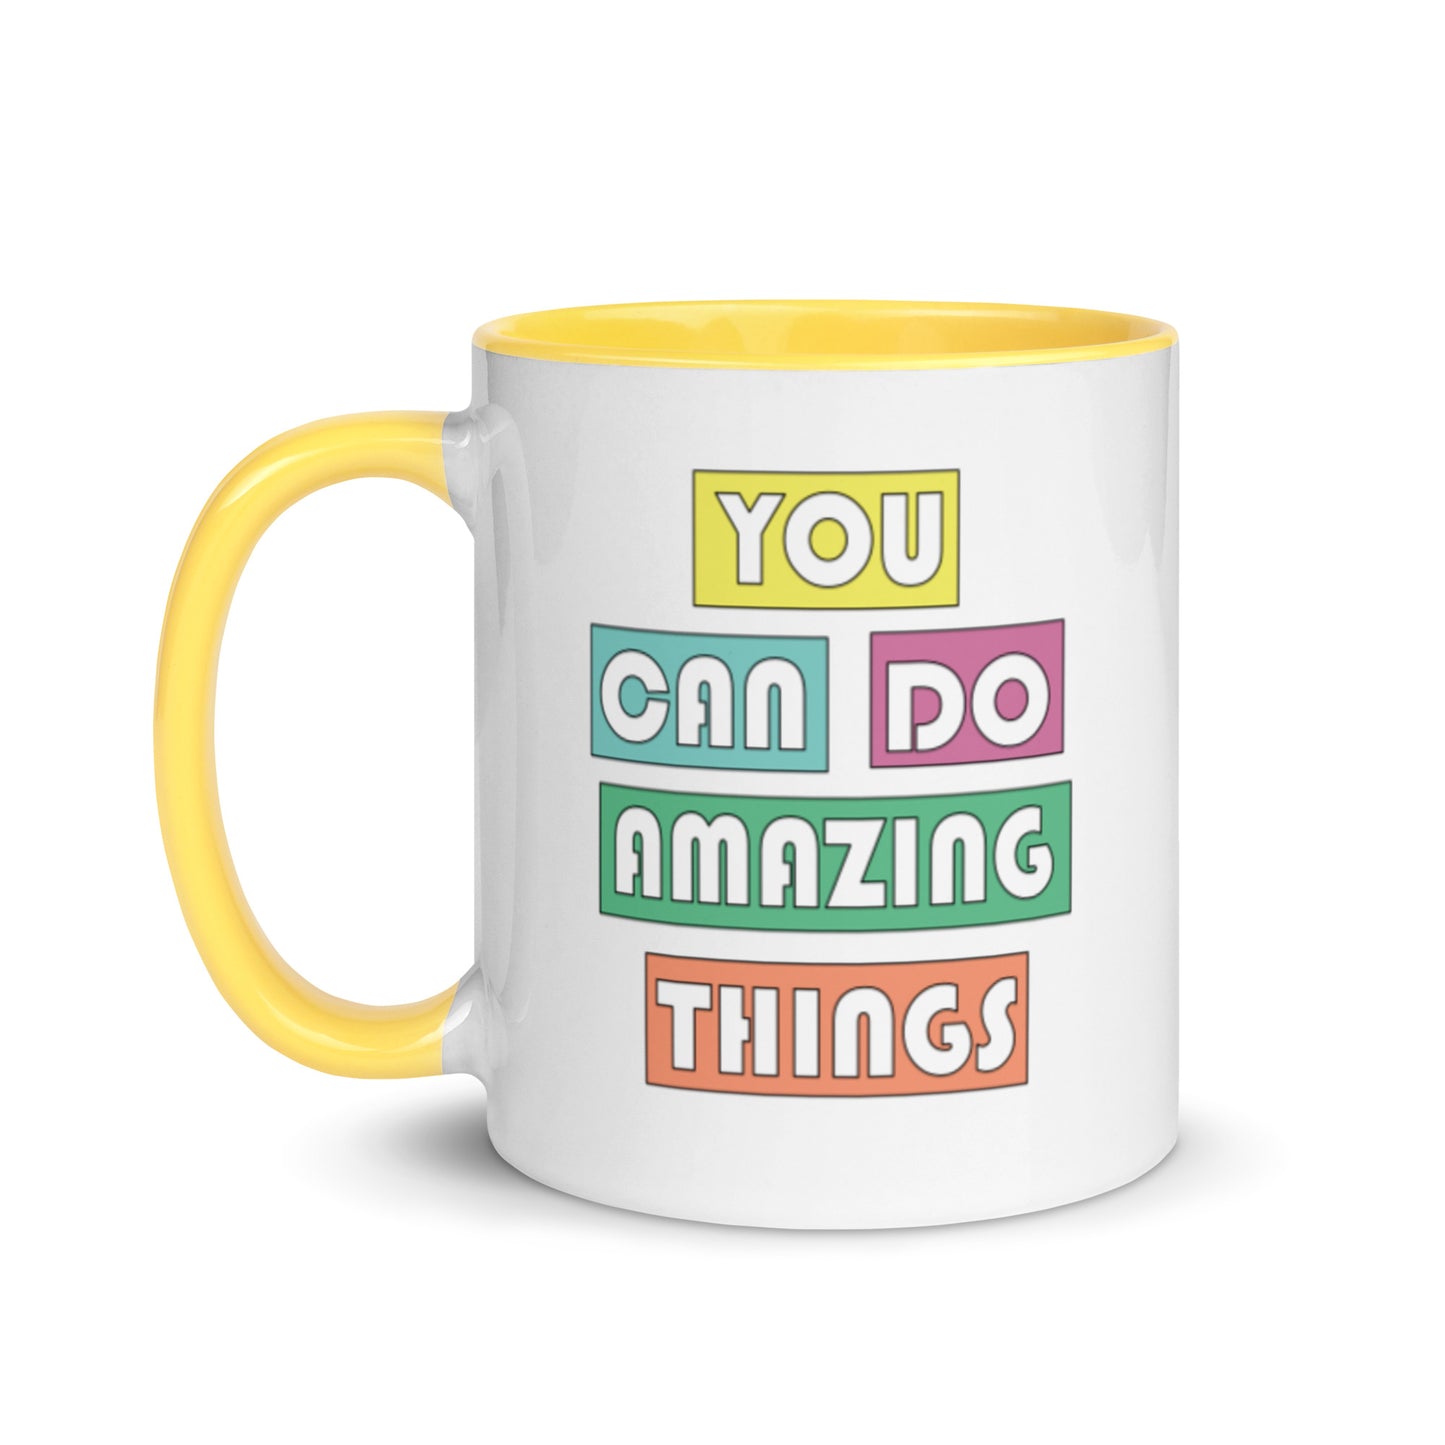 You can do amazing things, ceramic mug with yellow interior.